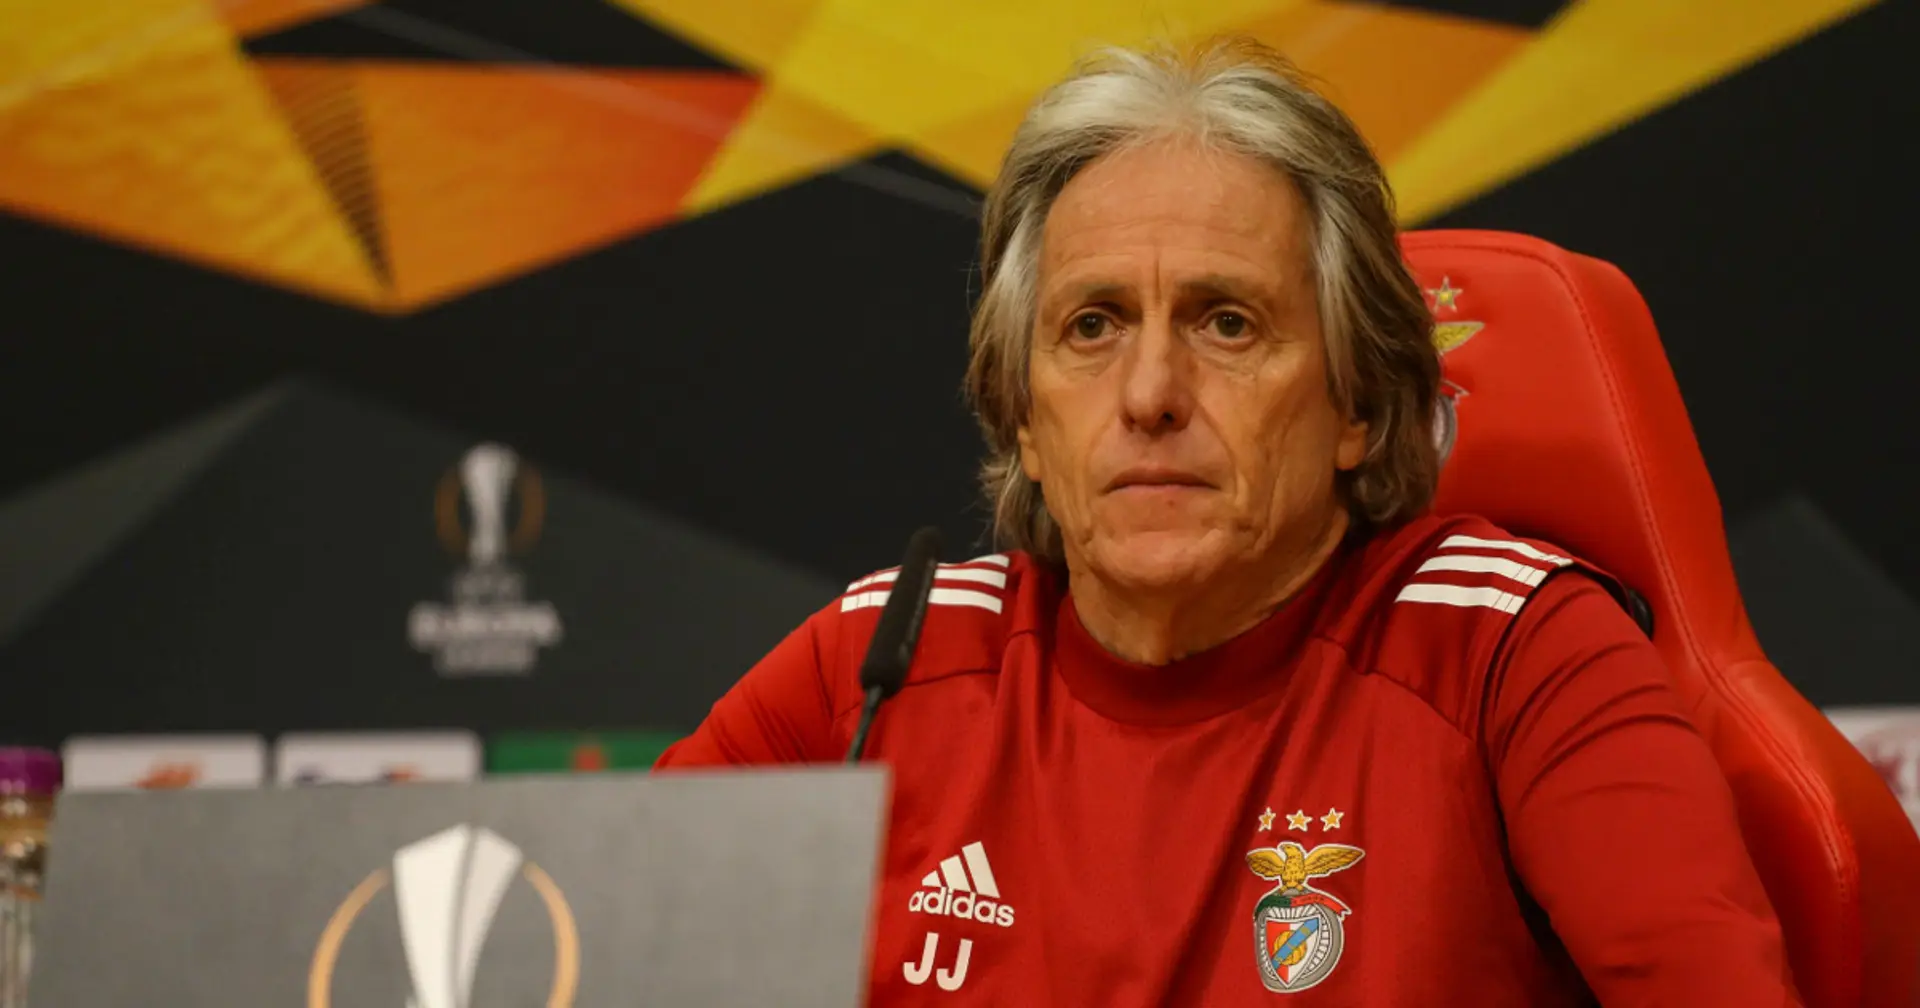 Benfica boss: The Europa League is not a 'lifeline' to save our season, we are determined to go as far as possible